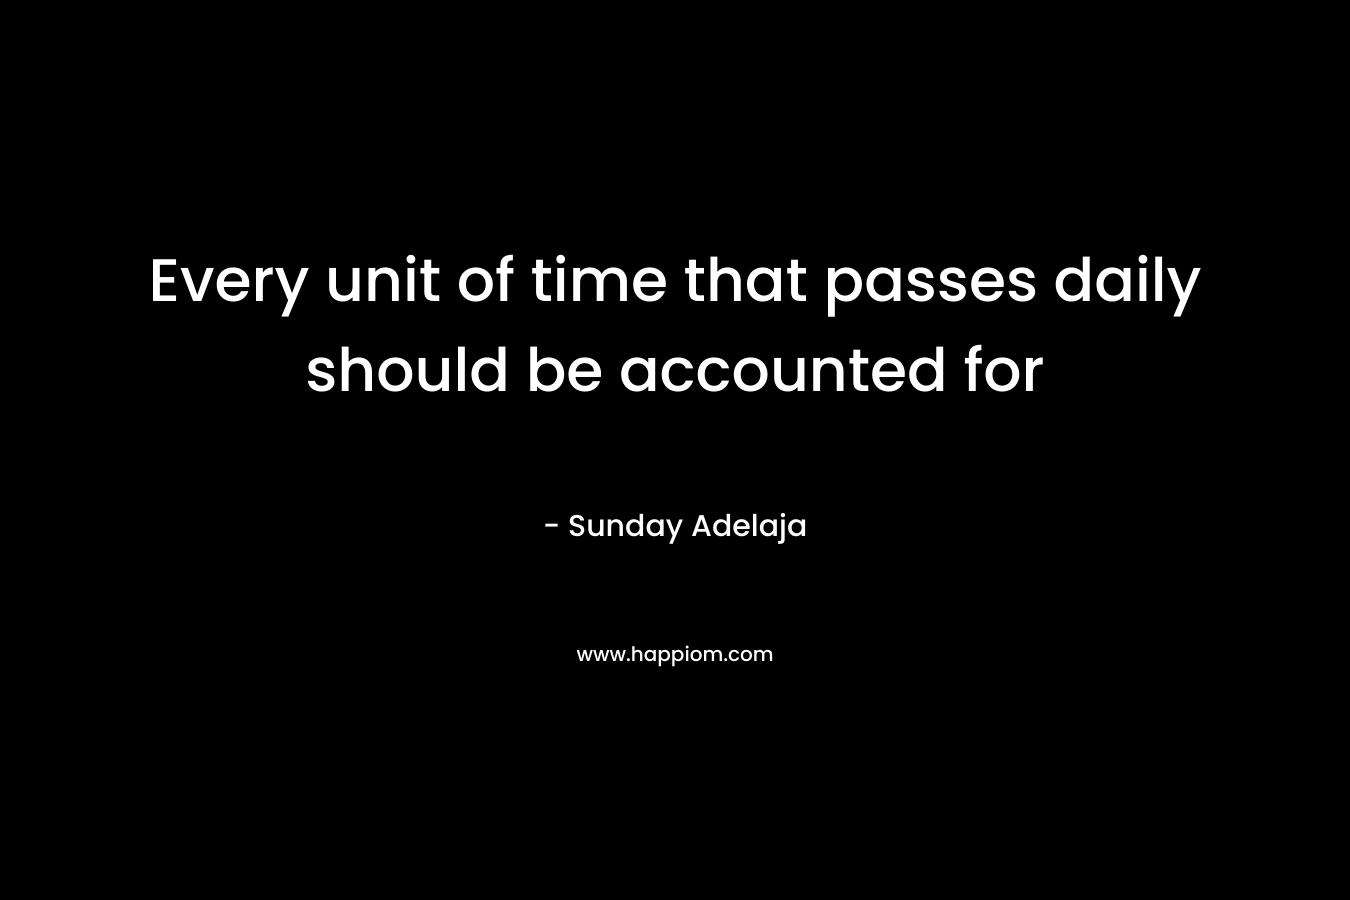 Every unit of time that passes daily should be accounted for